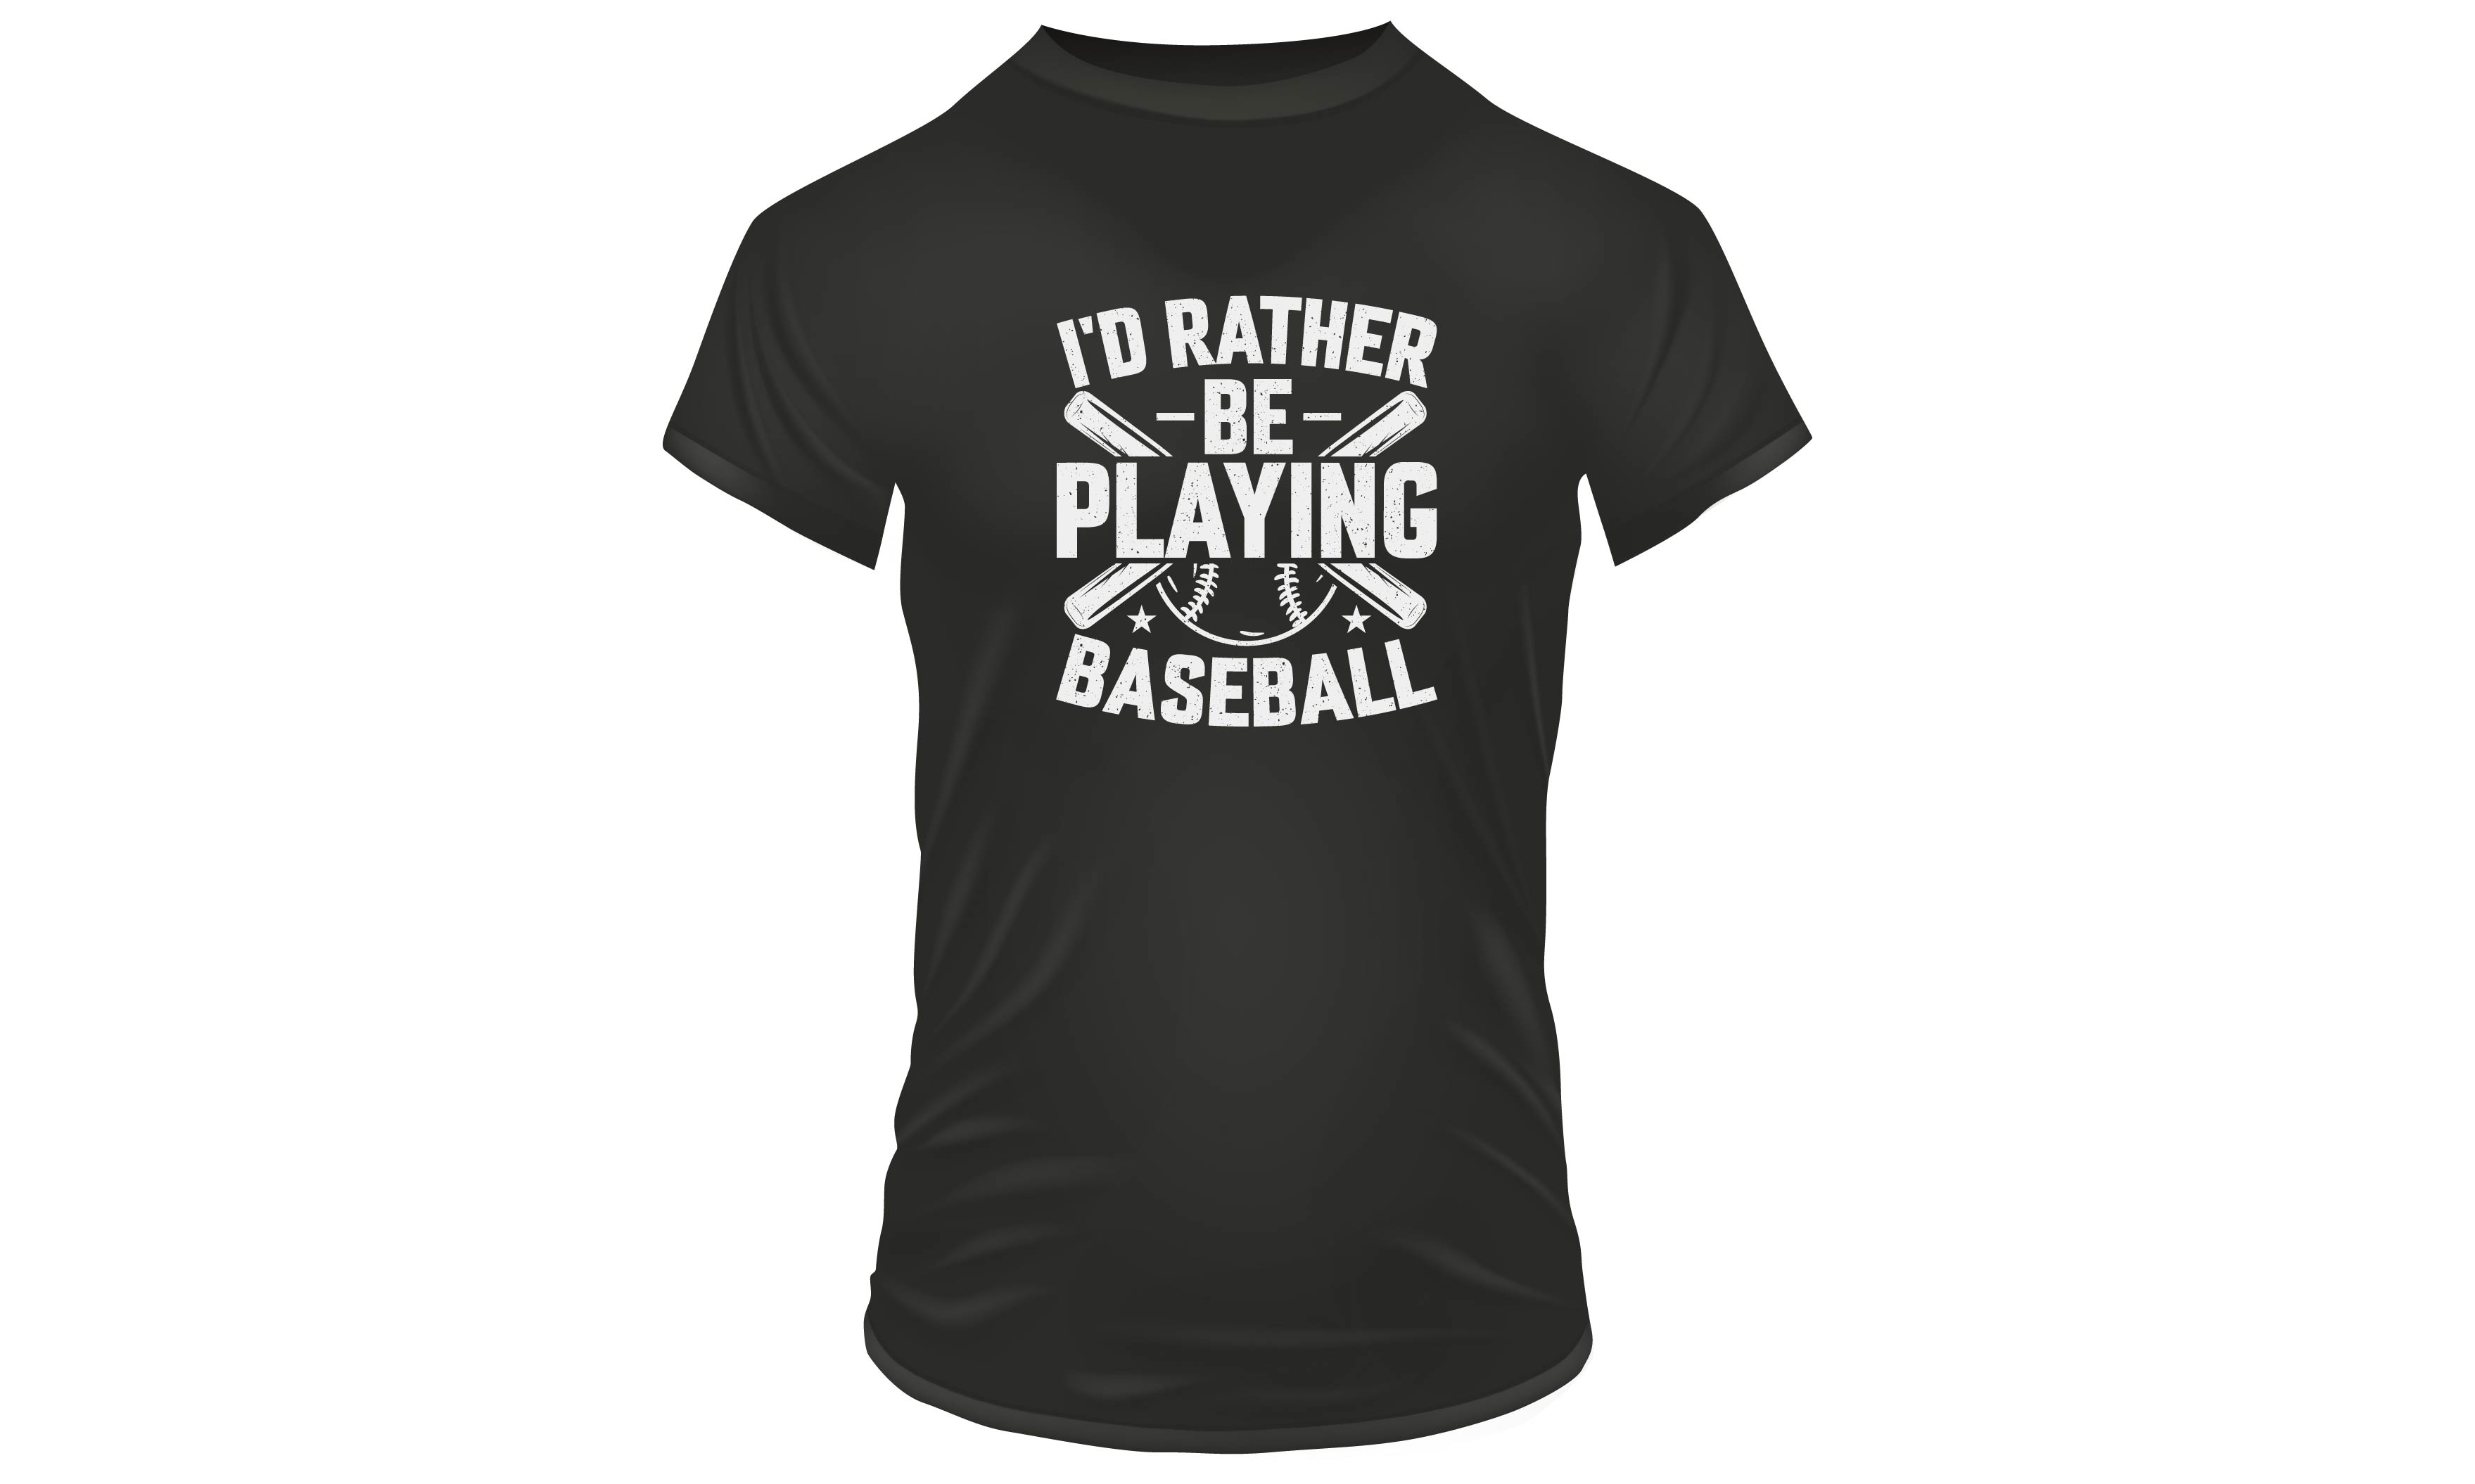 T - shirt that says to rather be playing baseball.